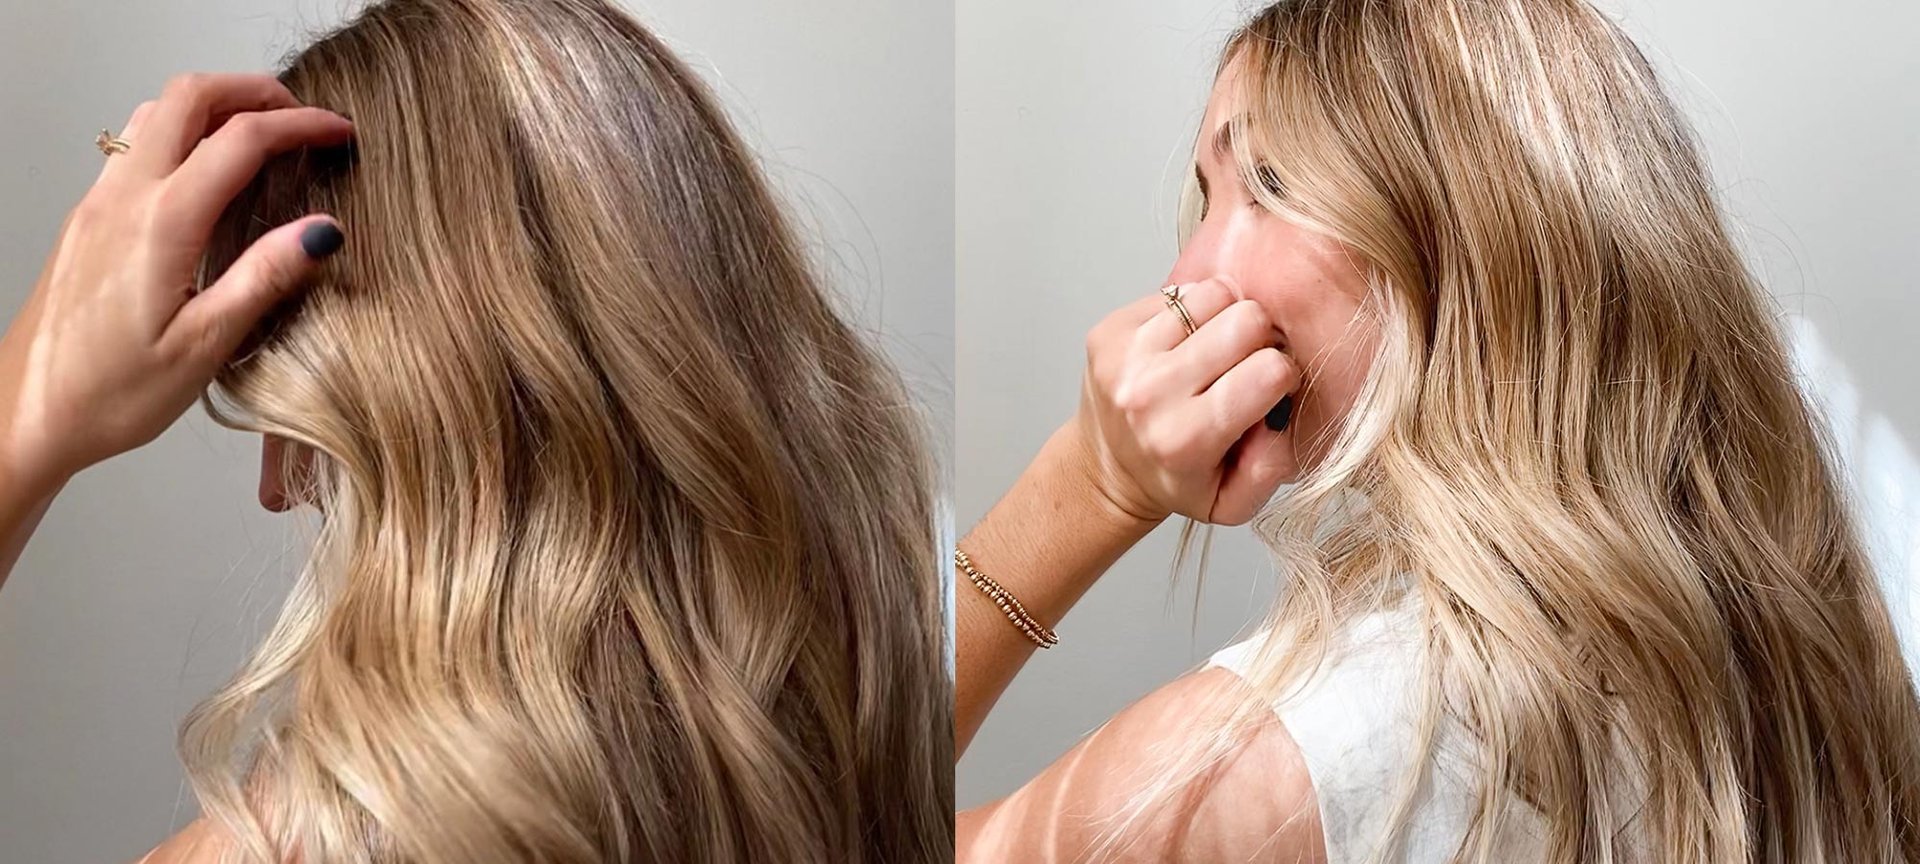 How to Apply Permanent Hair Color 